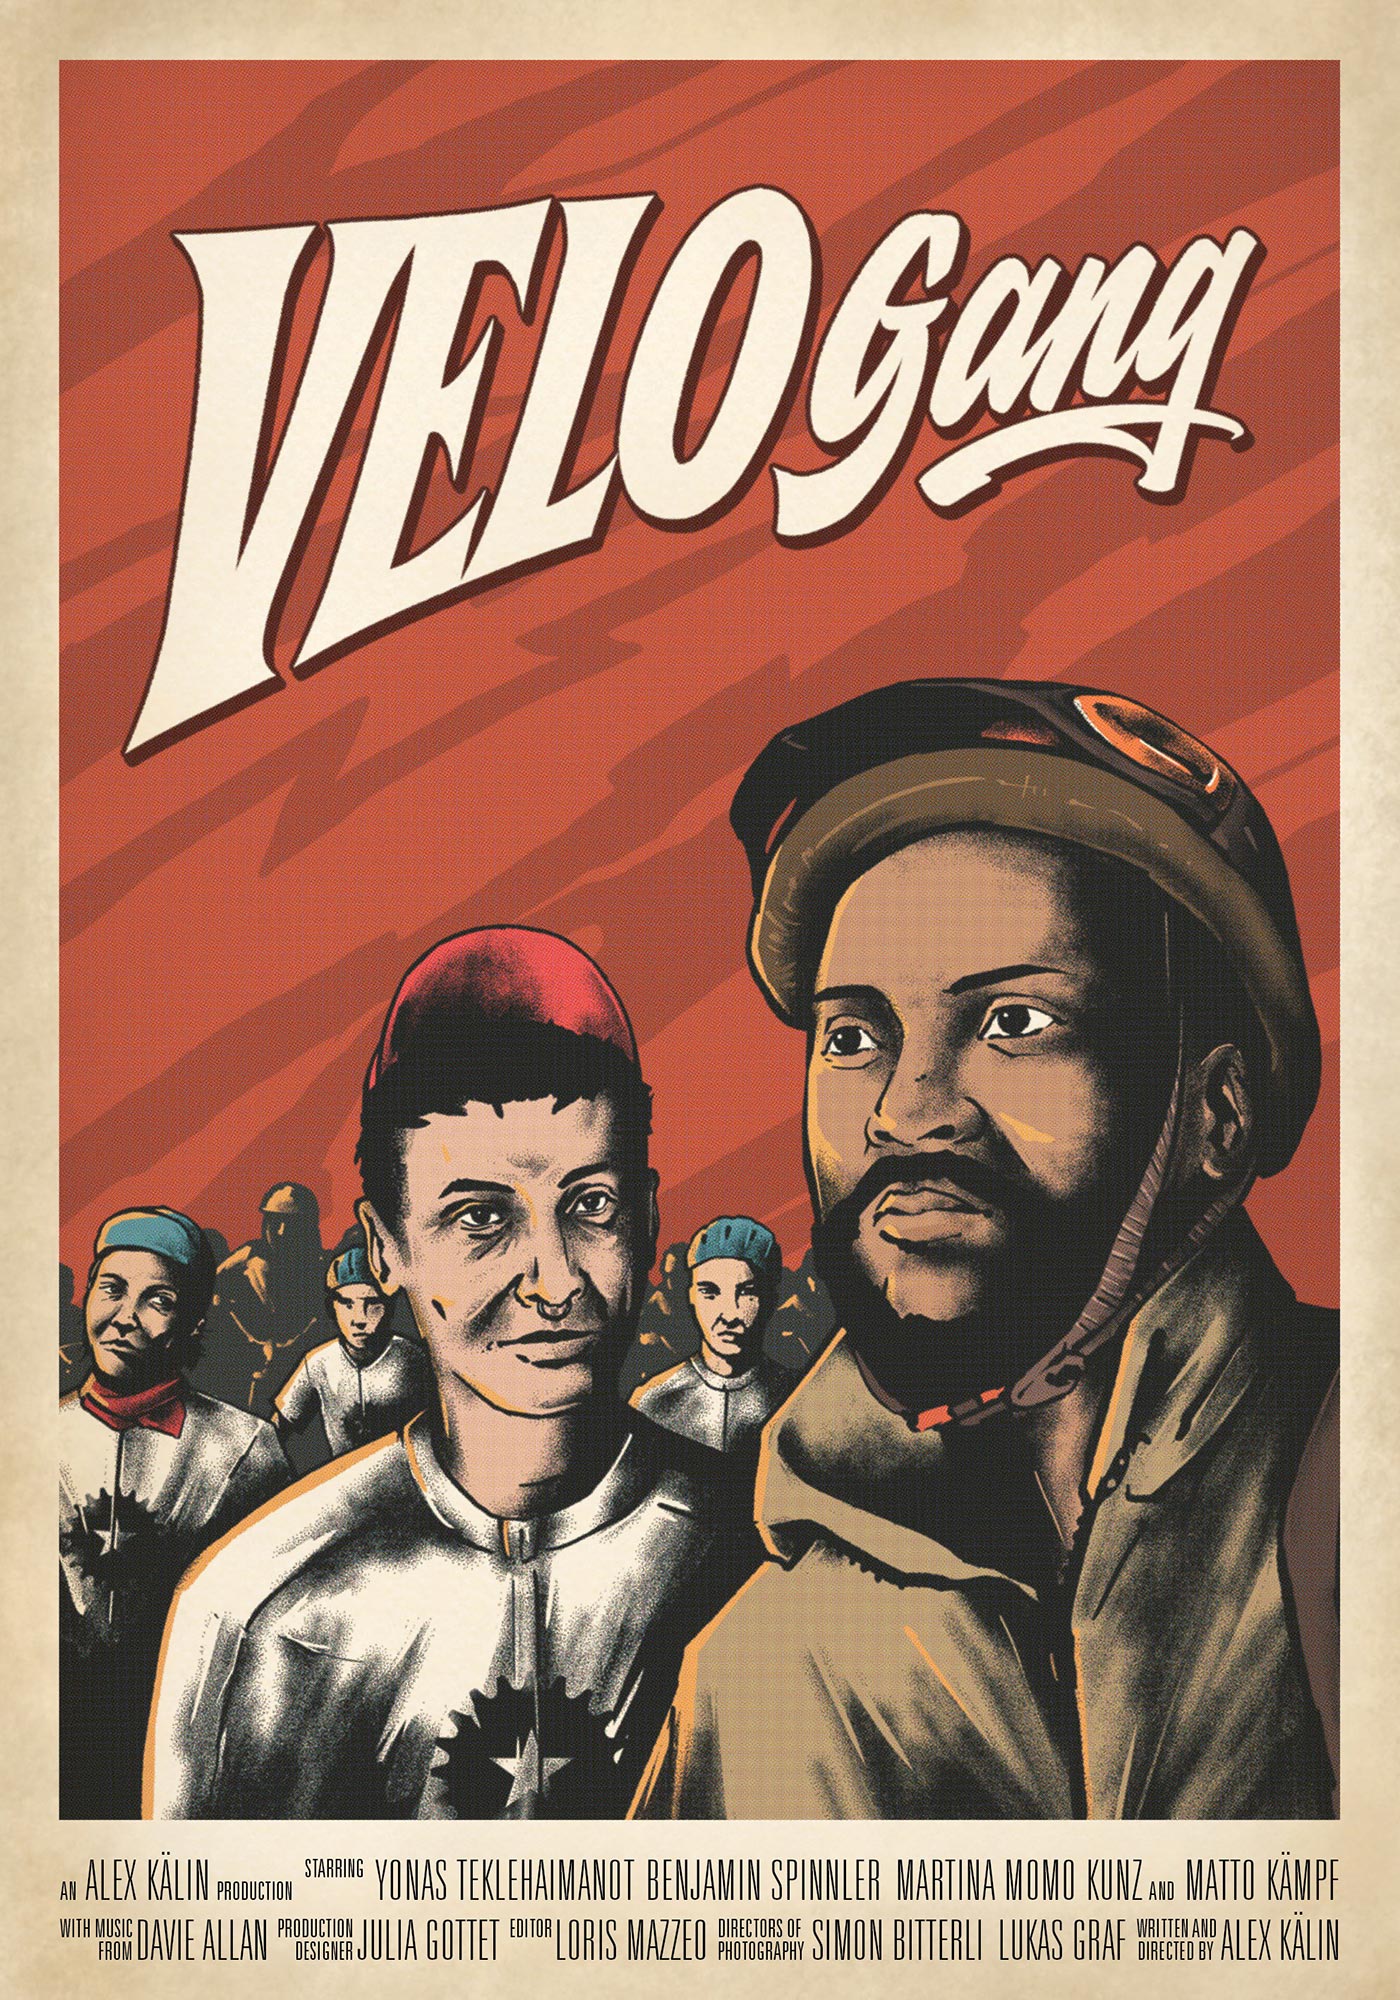 The movie poster for velo gang shows a few illustrator bike-couriers. On top of them, the film tilte in big letters